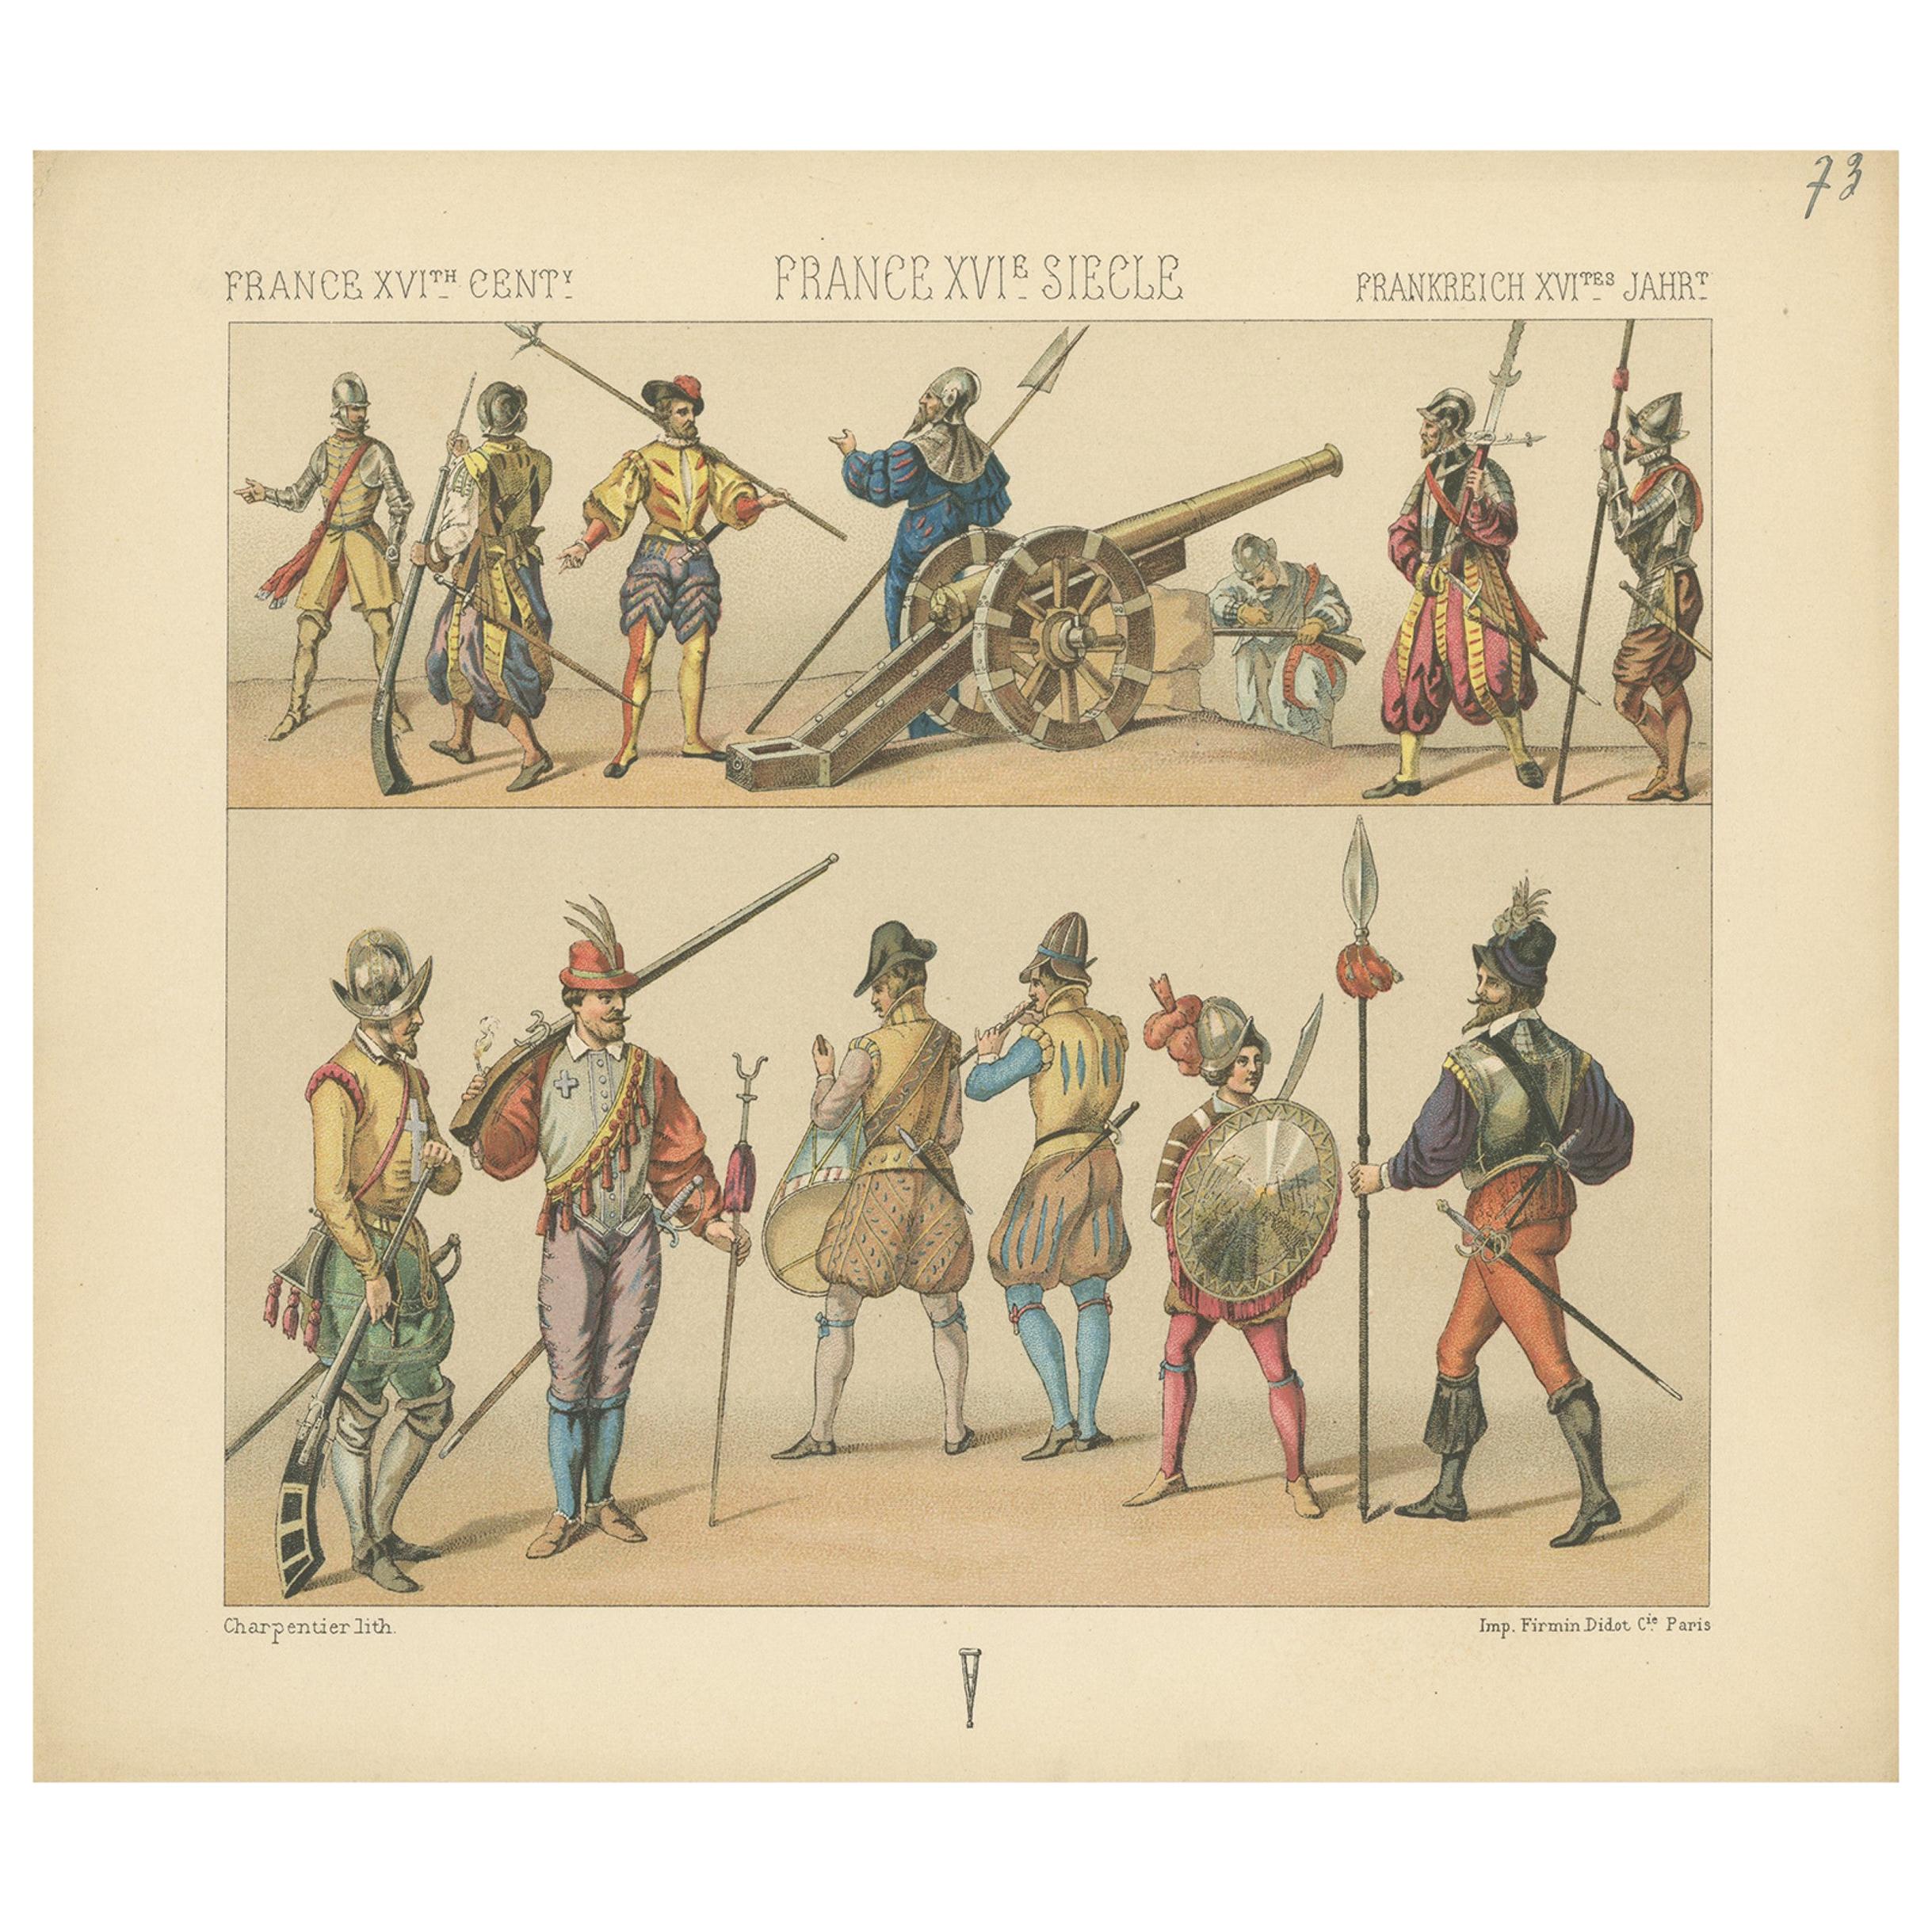 Pl. 73 Antique Print of French 16th Century Battle Costumes, Racinet, circa 1880